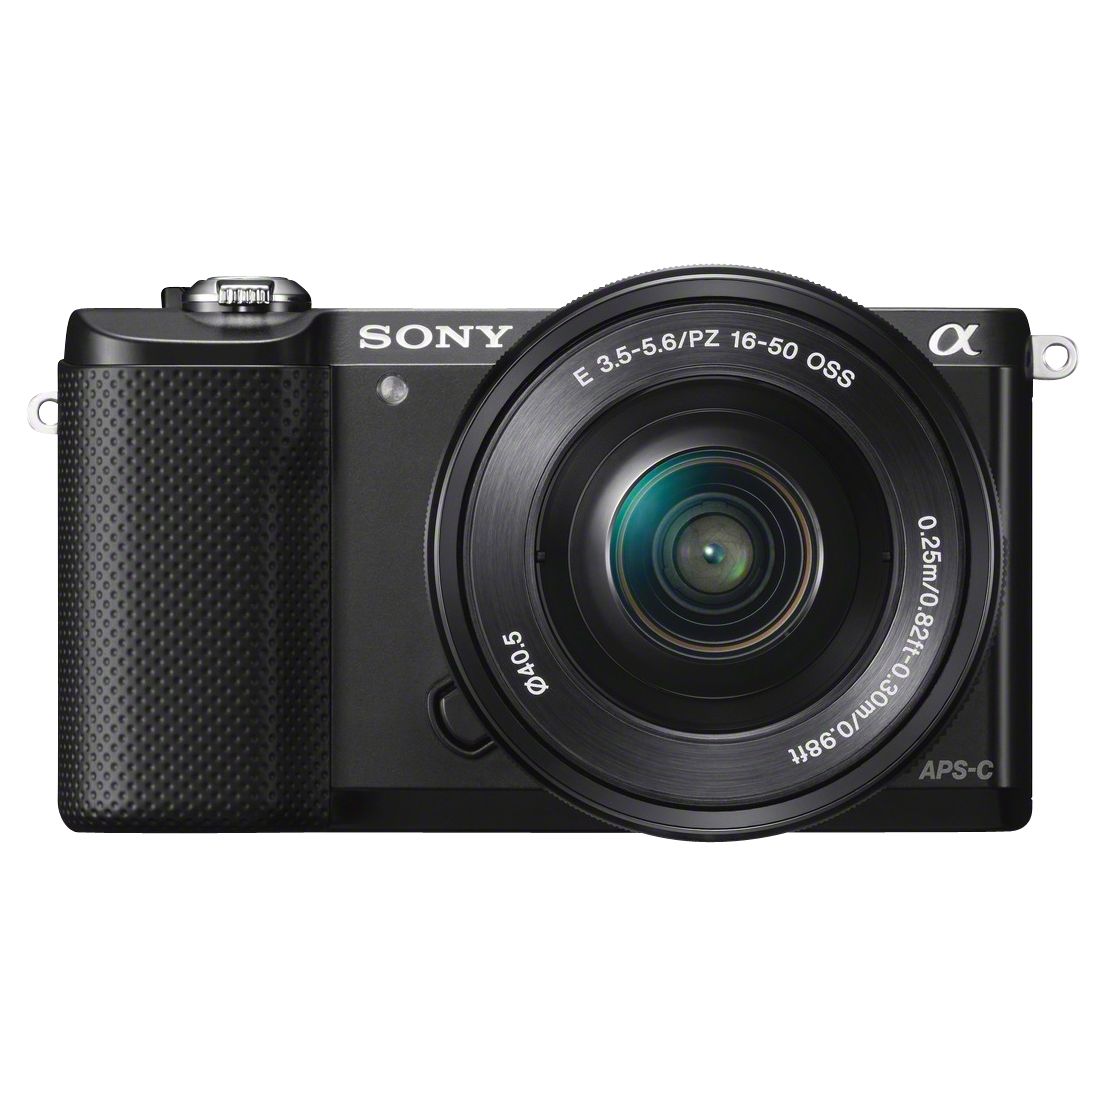 Sony A5000 Compact System Camera with 16-50mm Lens, HD 1080p, 20.1MP, Wi-Fi, 3" Tilting LCD Screen